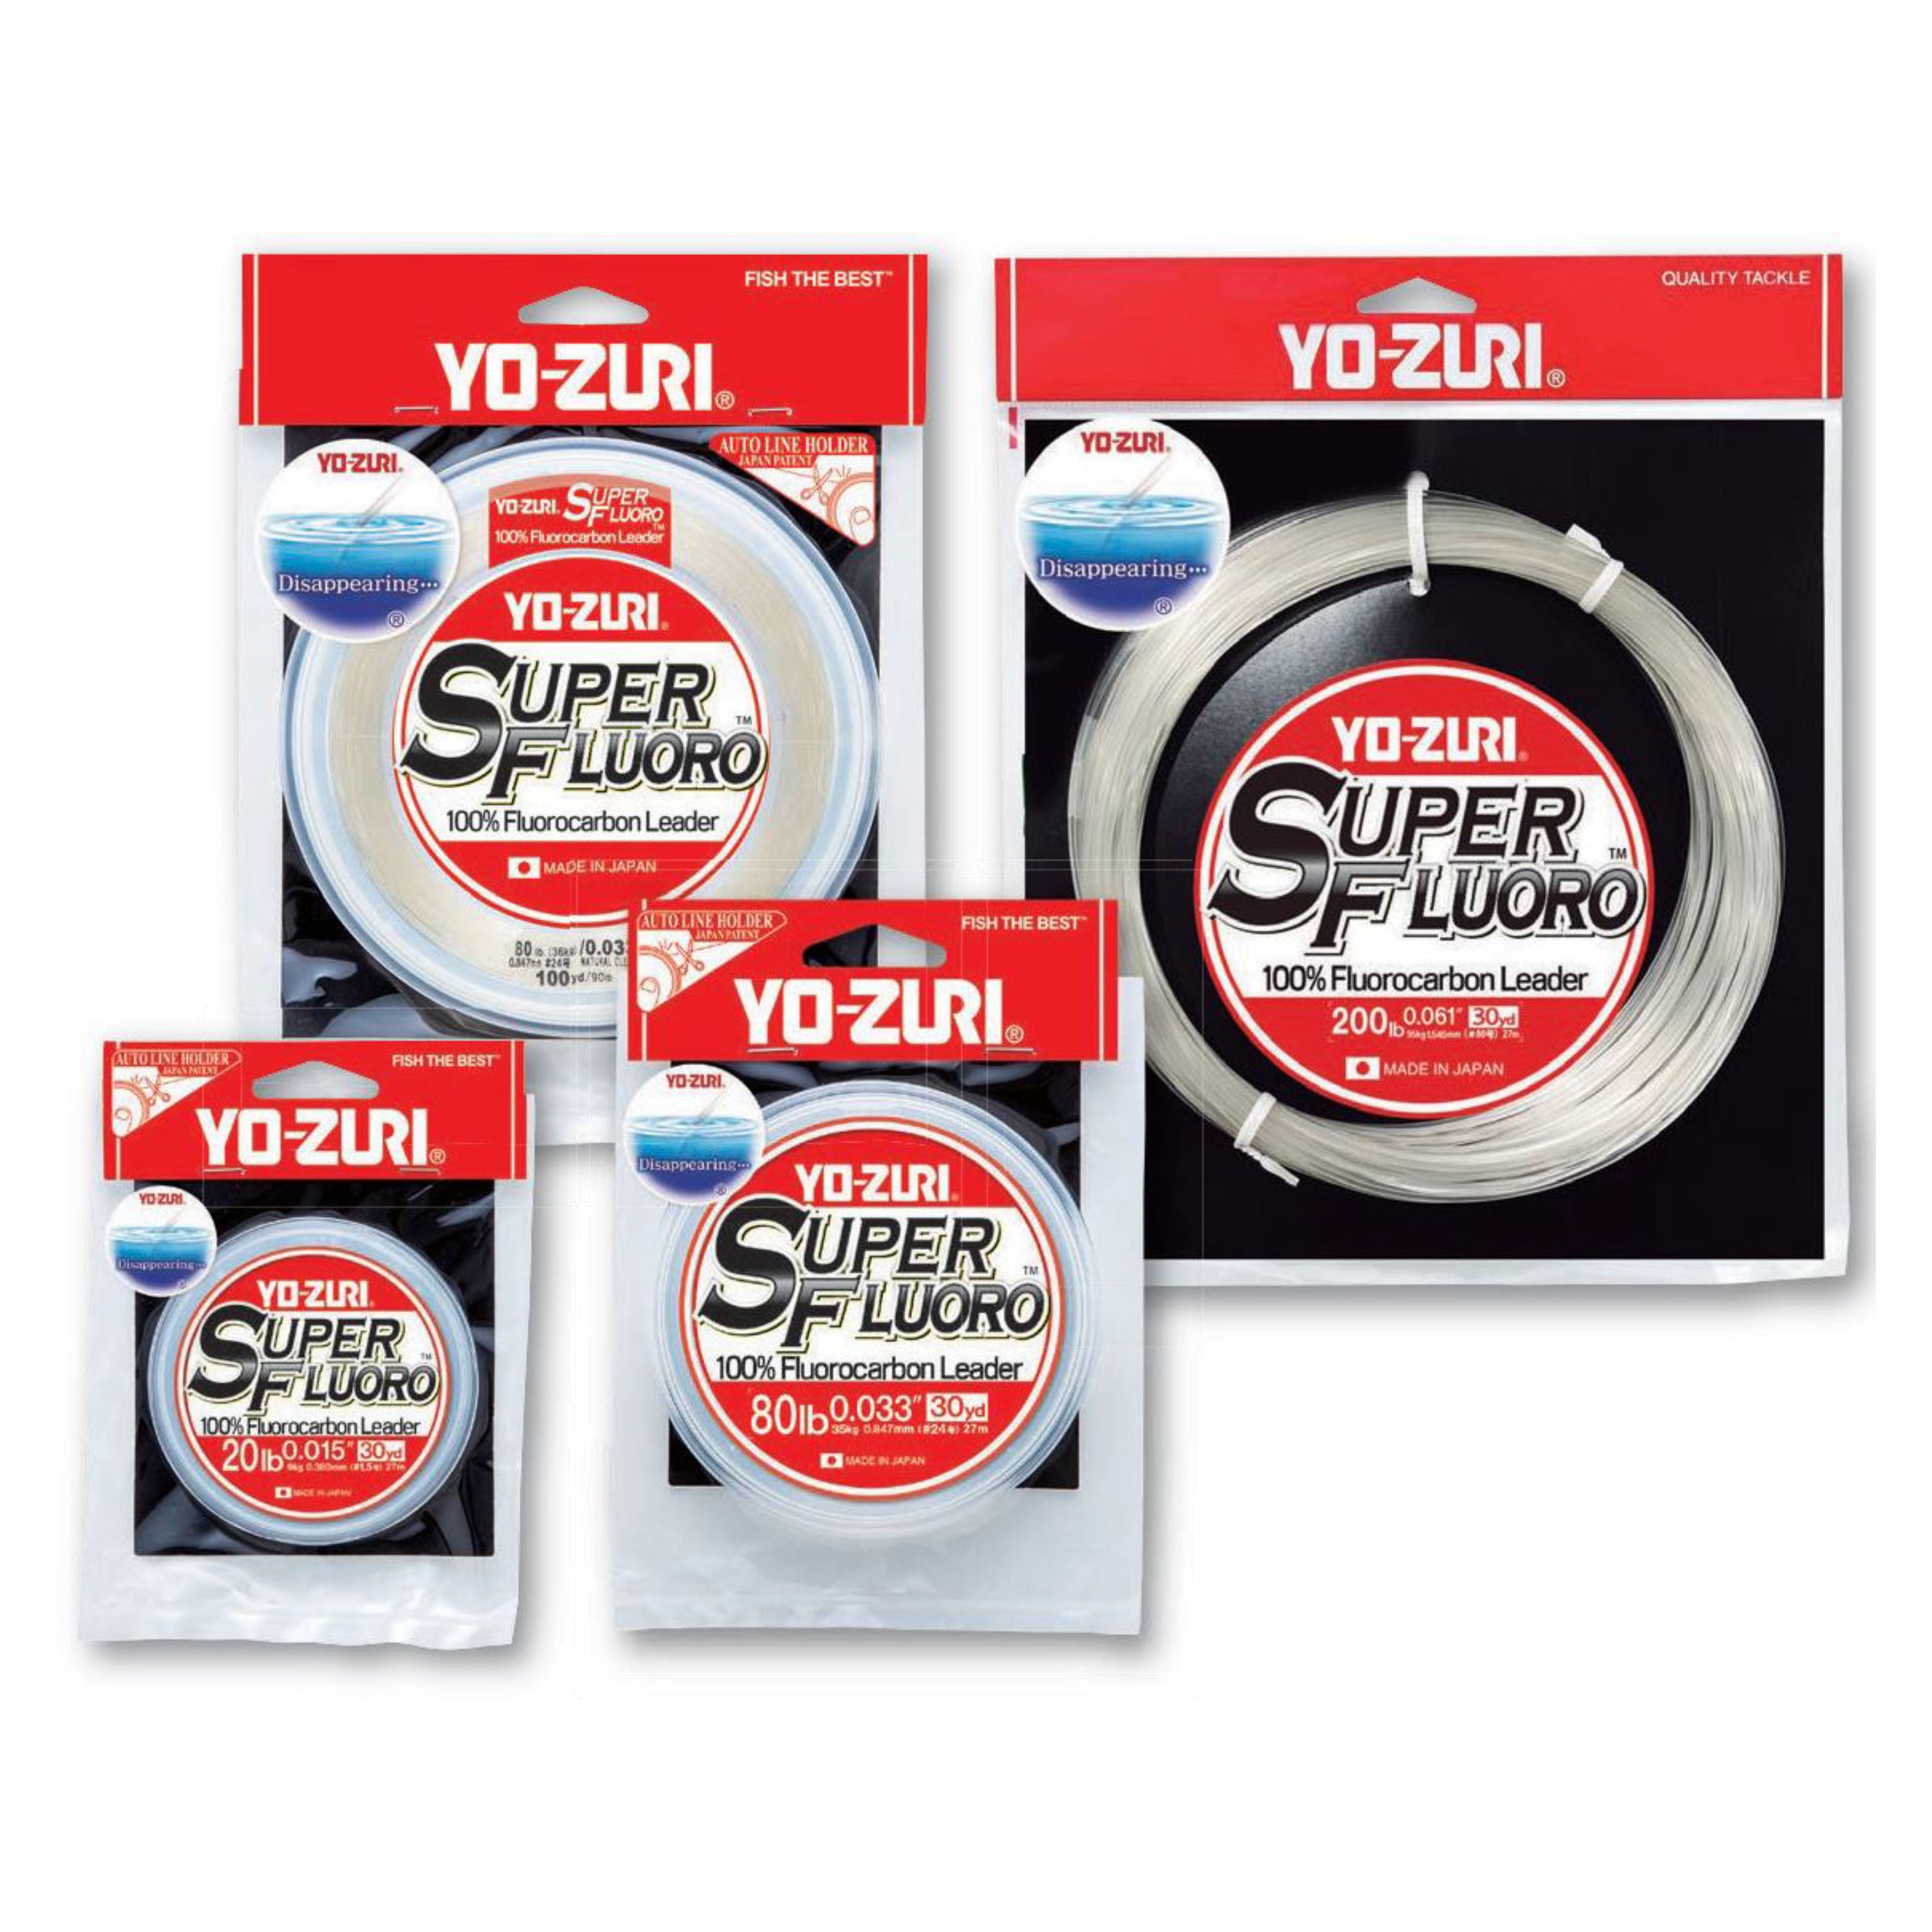 2/9 - Fluorocarbon up to 64% OFF!